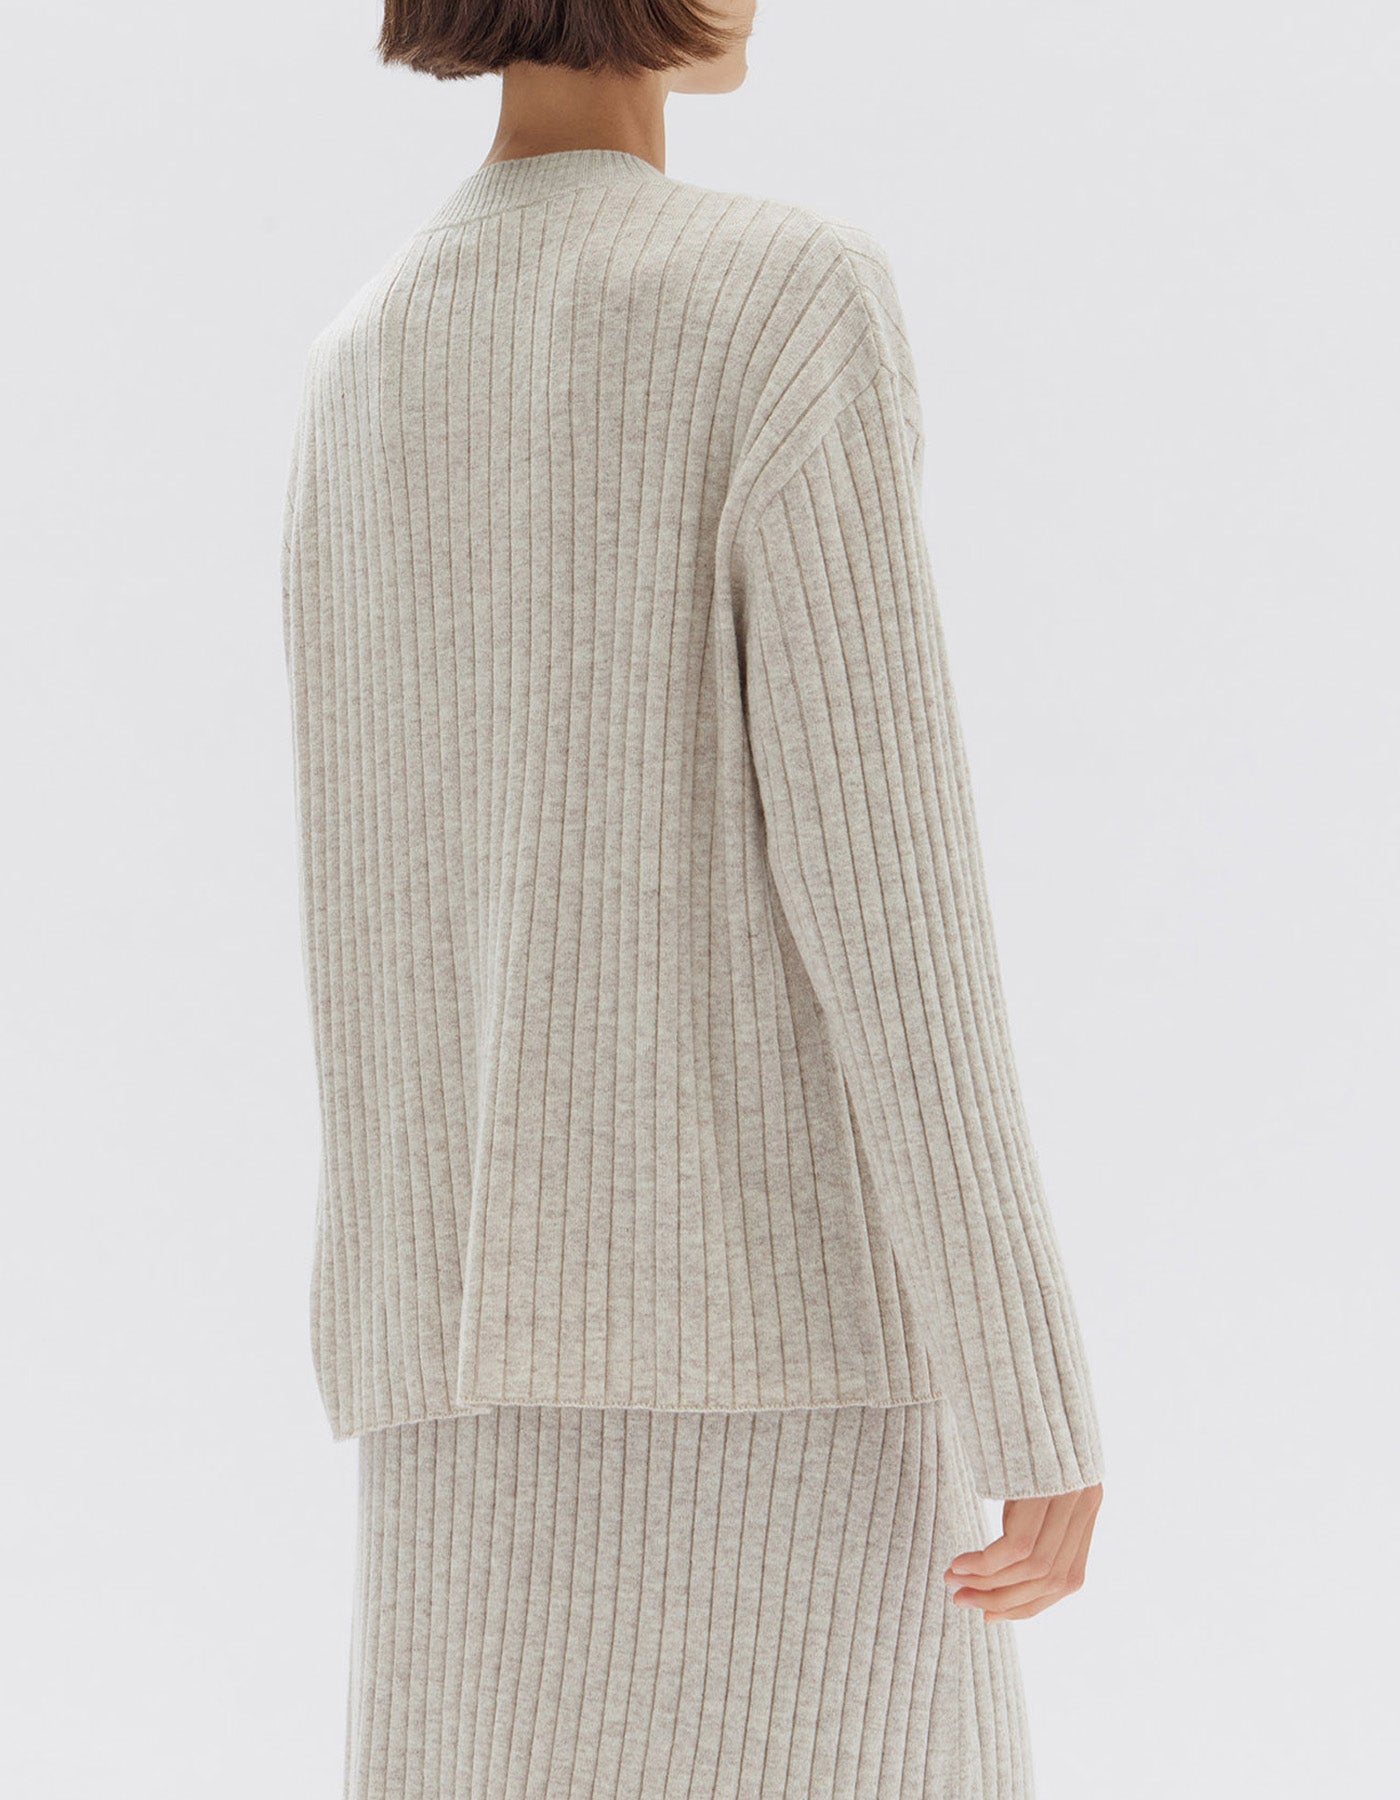 Assembly Label Wool Cashmere Long Sleeve Top Oat Marle